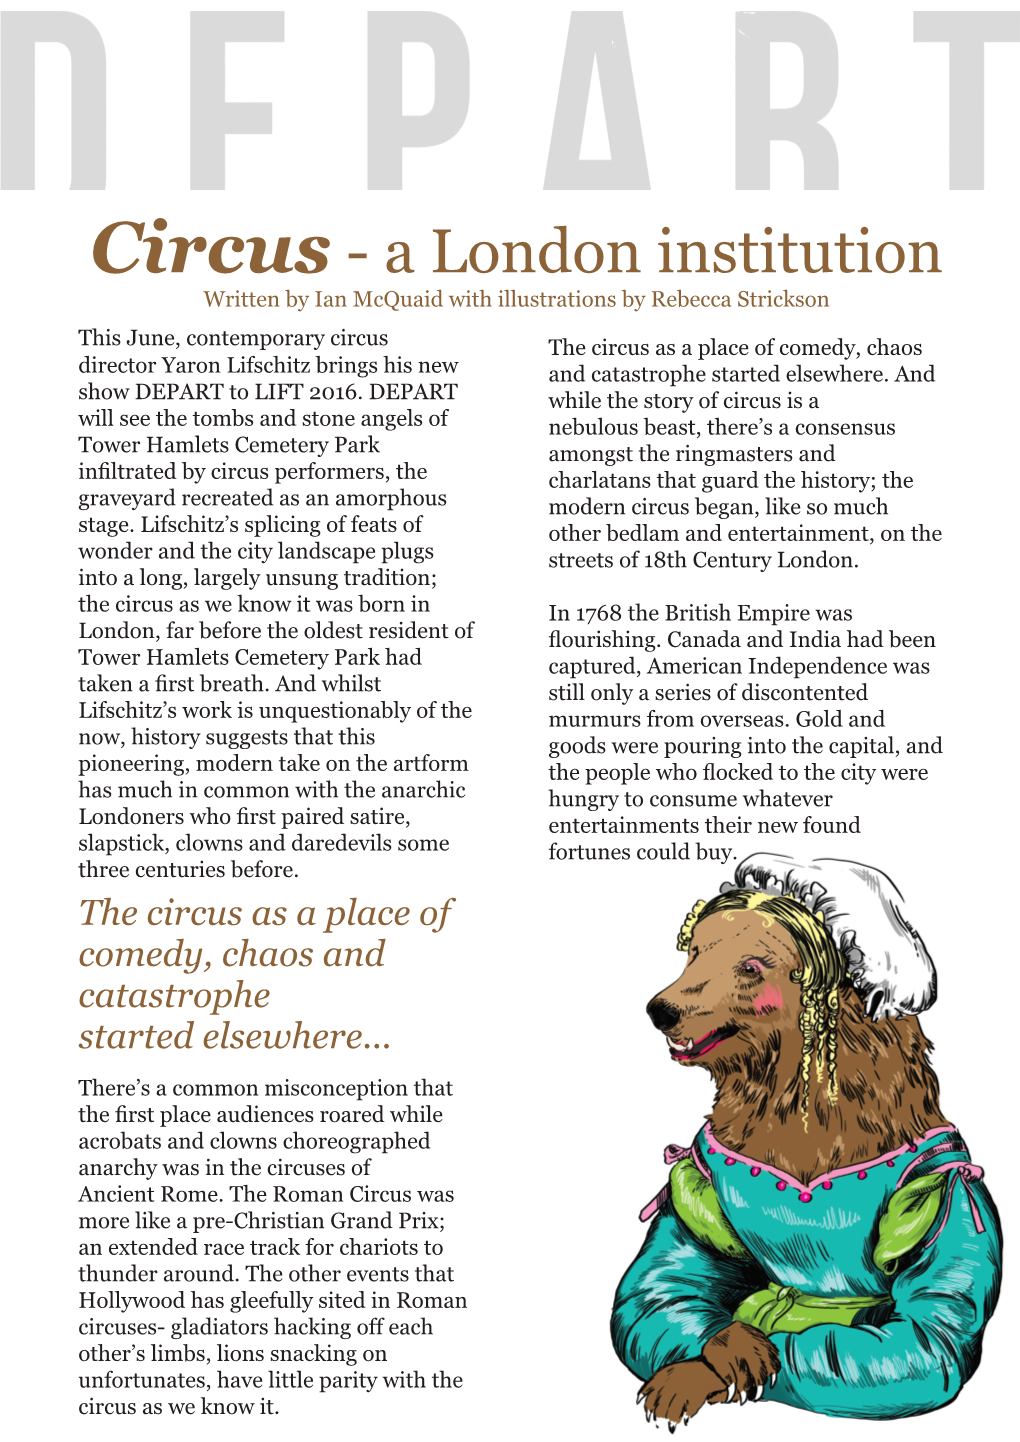 Circus - a London Institution Written by Ian Mcquaid with Illustrations by Rebecca Strickson